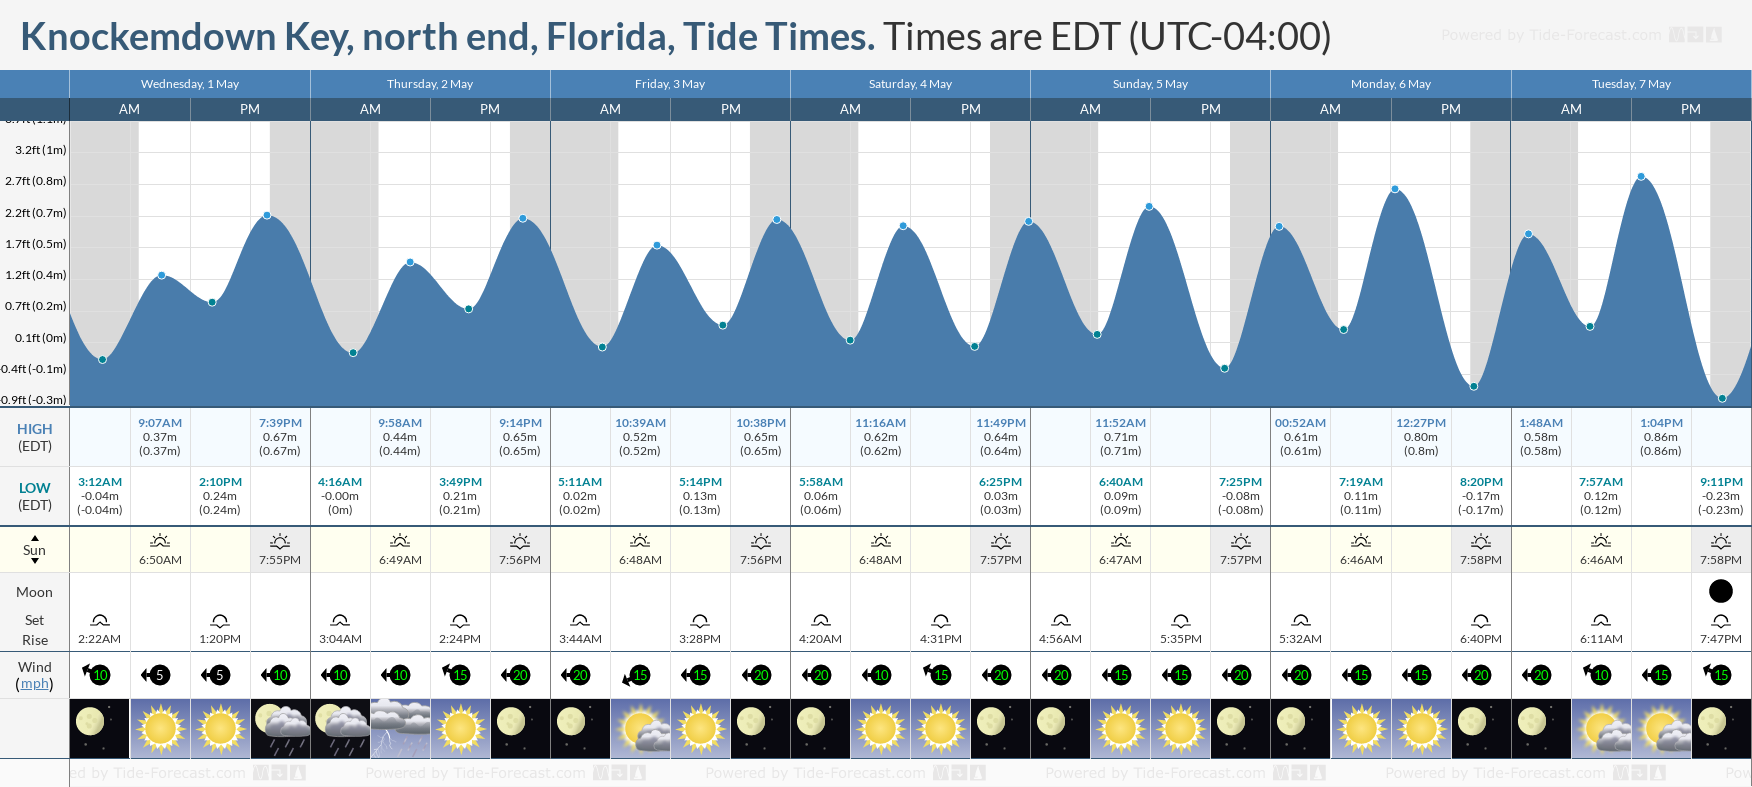 Knockemdown Key, north end, Florida Tide Chart including high and low tide tide times for the next 7 days